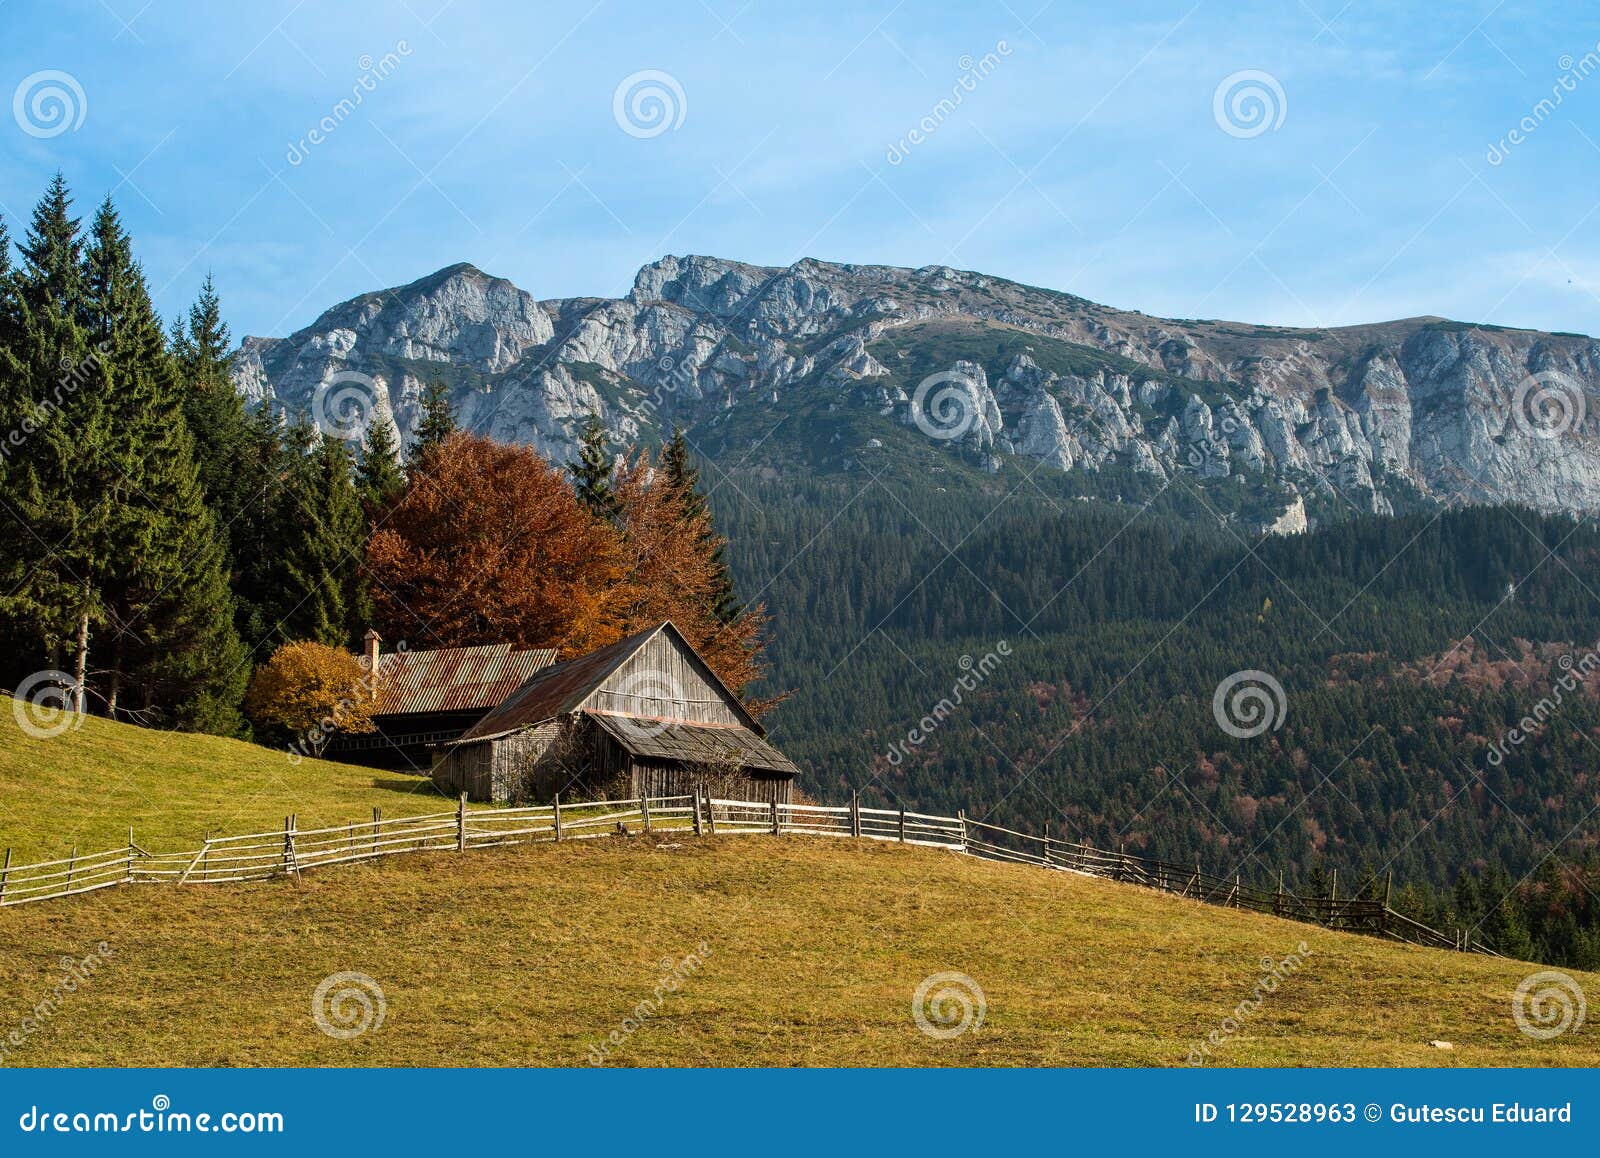 Deliberate Caliber cylinder Mountain Cabin in Carpathian Mountains ,autumn in Romania Stock Image -  Image of sunset, blue: 129528963